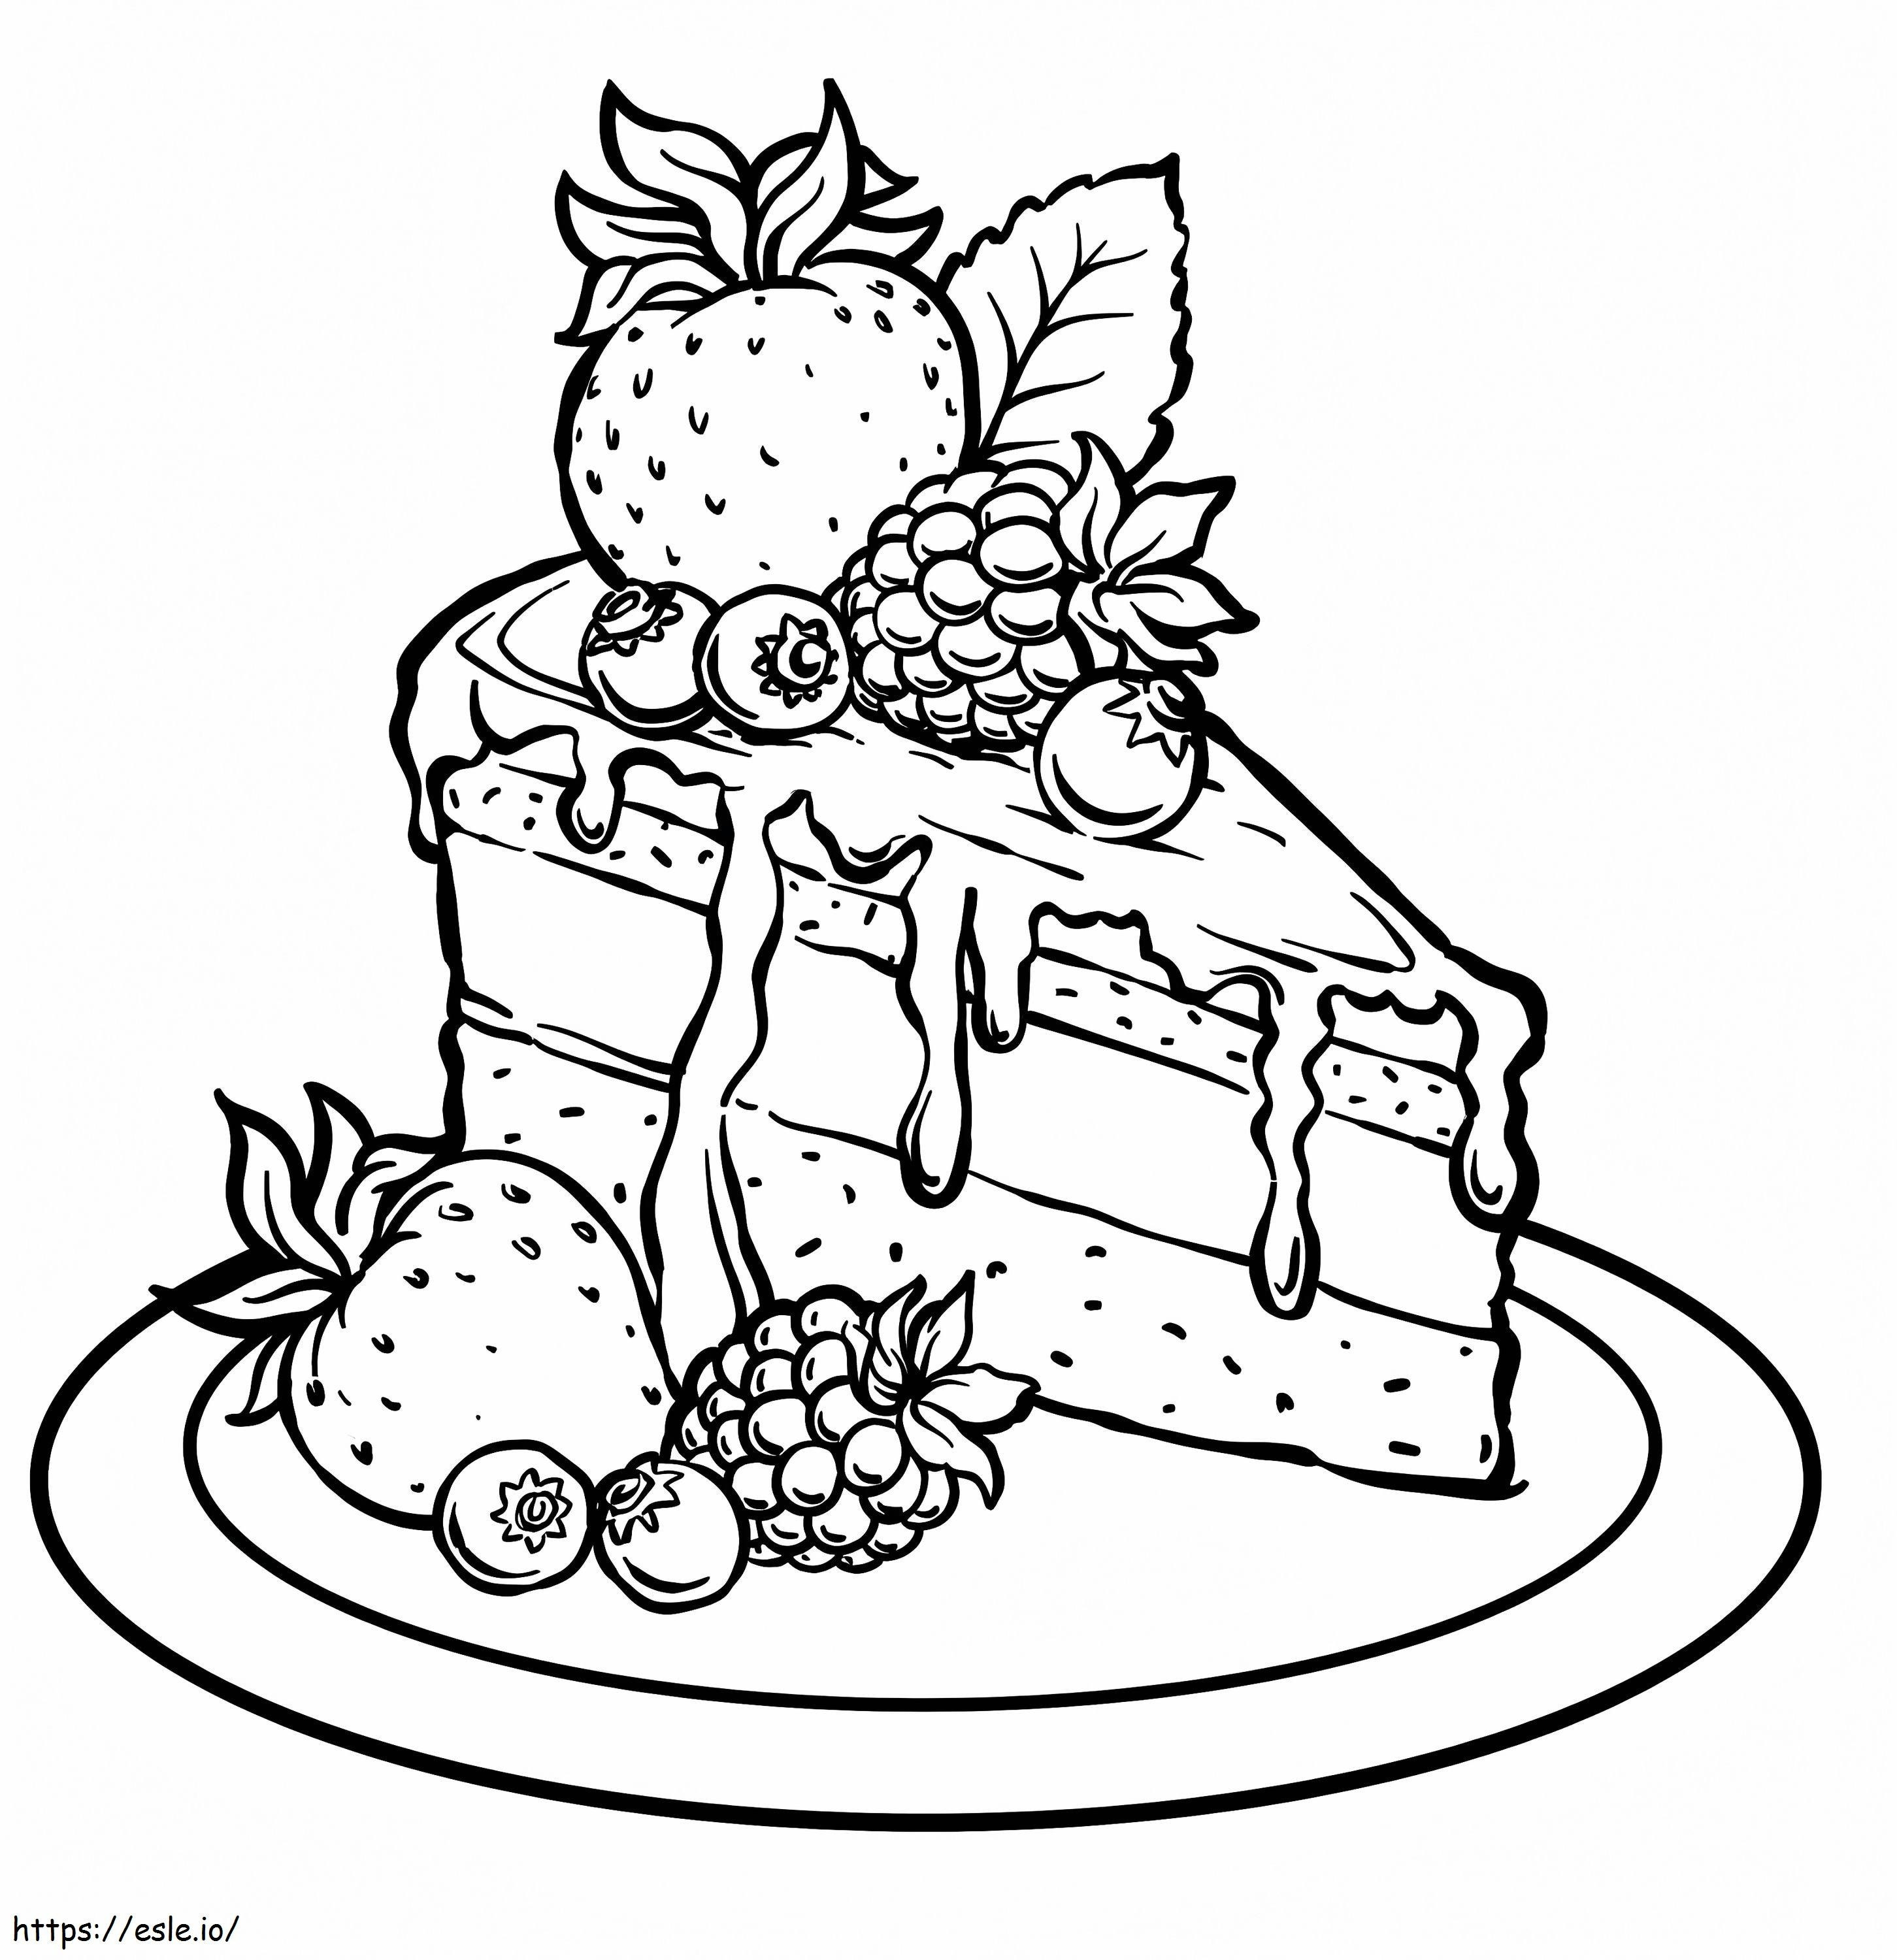 Fruits Cake coloring page